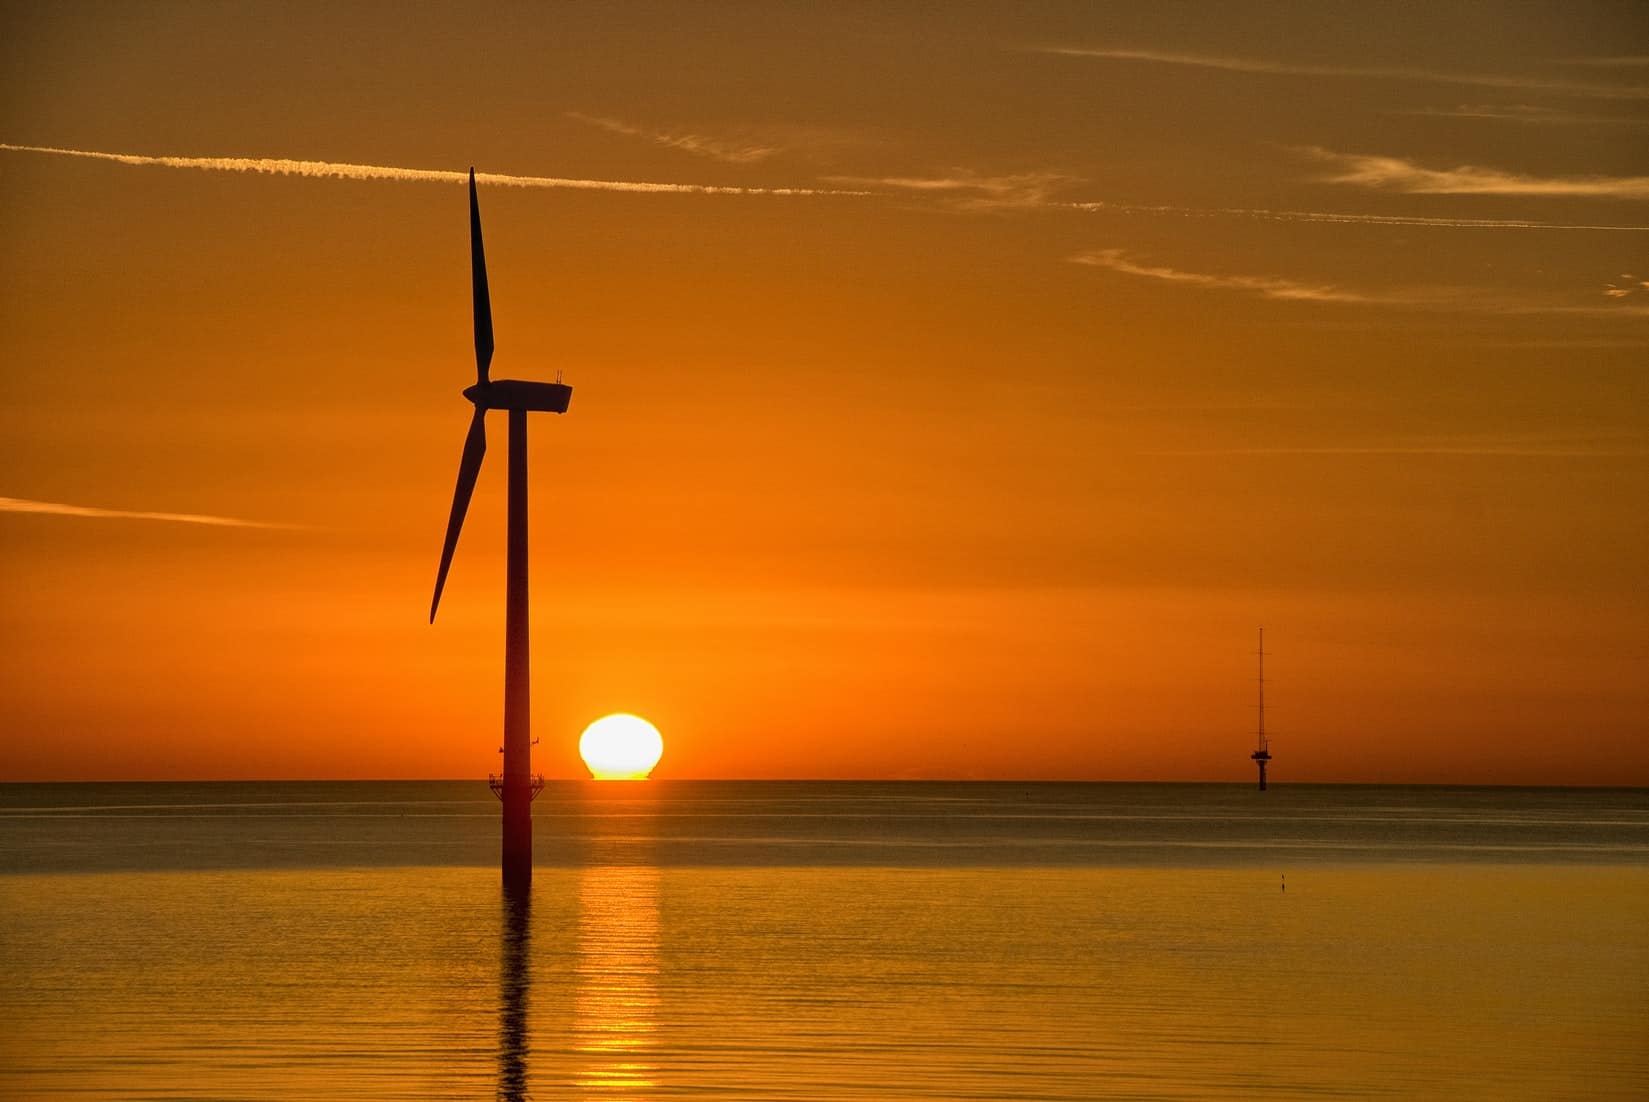 Virginia Regulator Clears Dominion’s Offshore Wind, Solar Projects